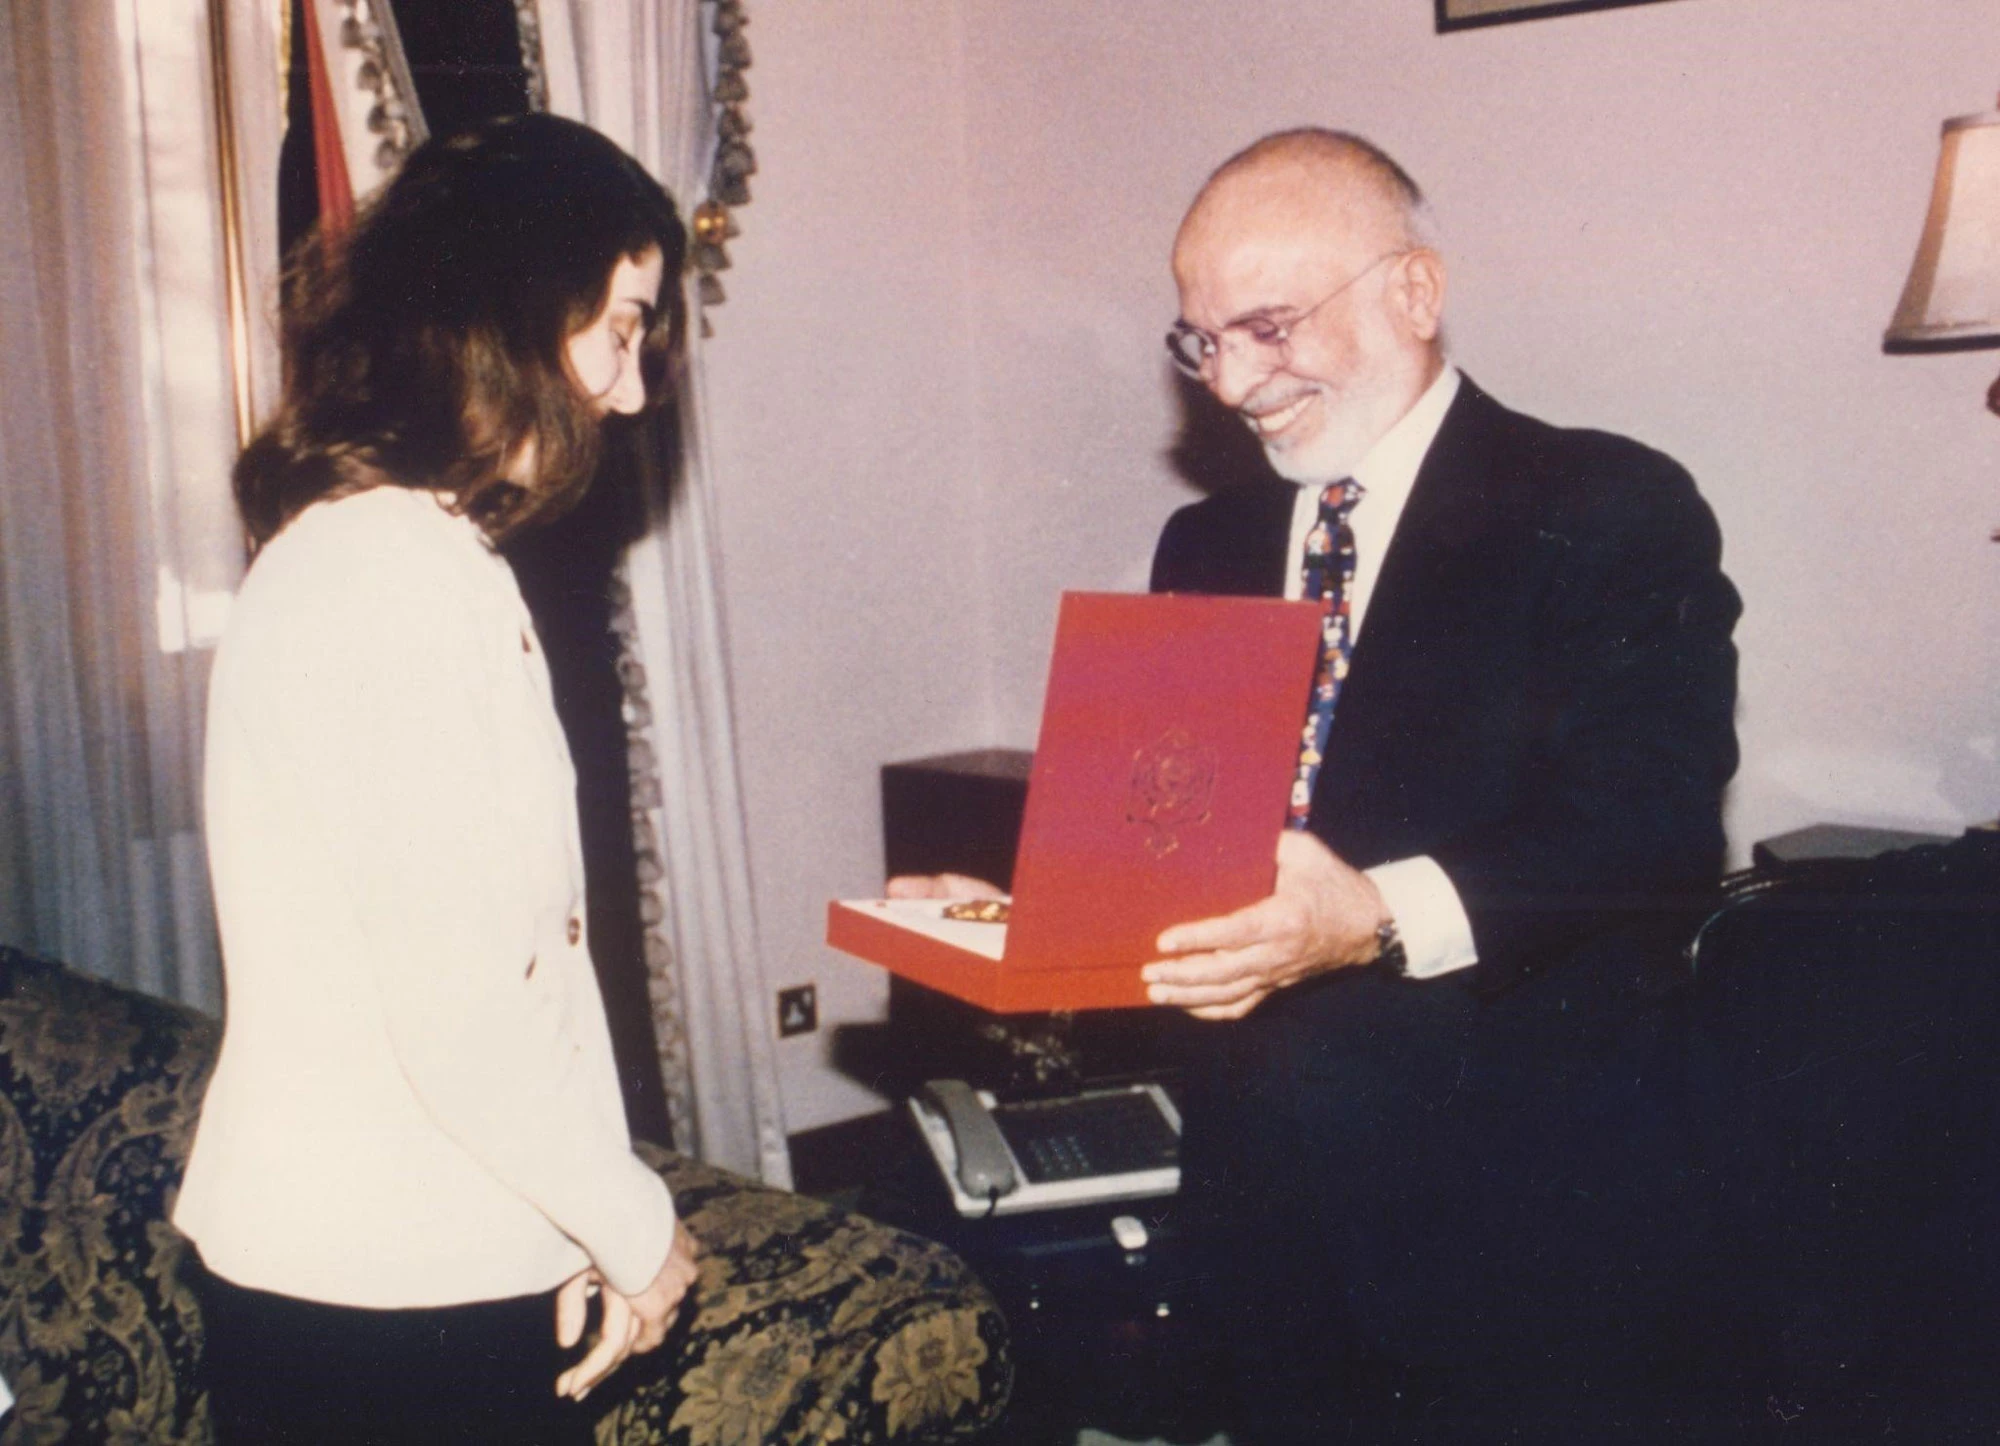 Dr. Iliana Sweis receiving the honorary medal